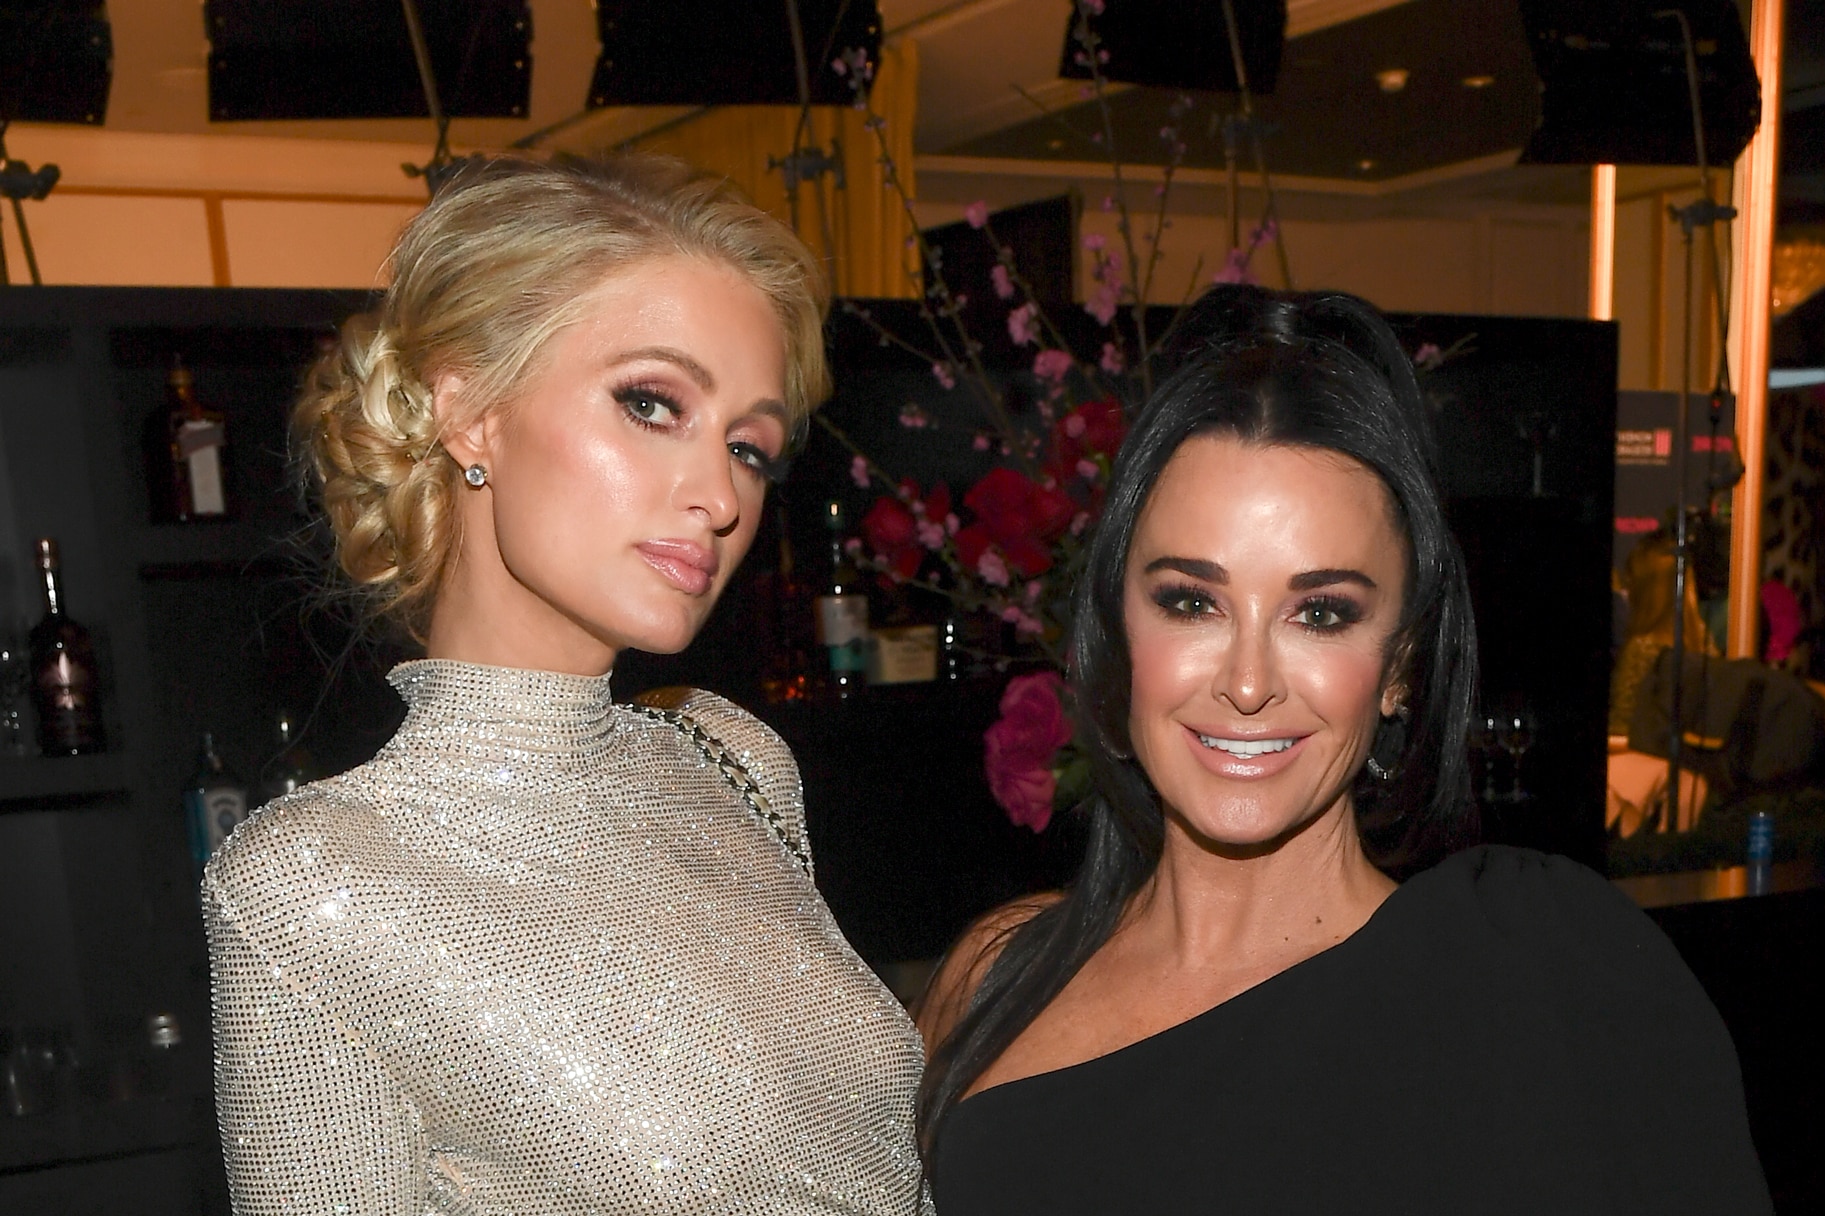 Kyle Richards and Paris Hilton pose for a photo together.